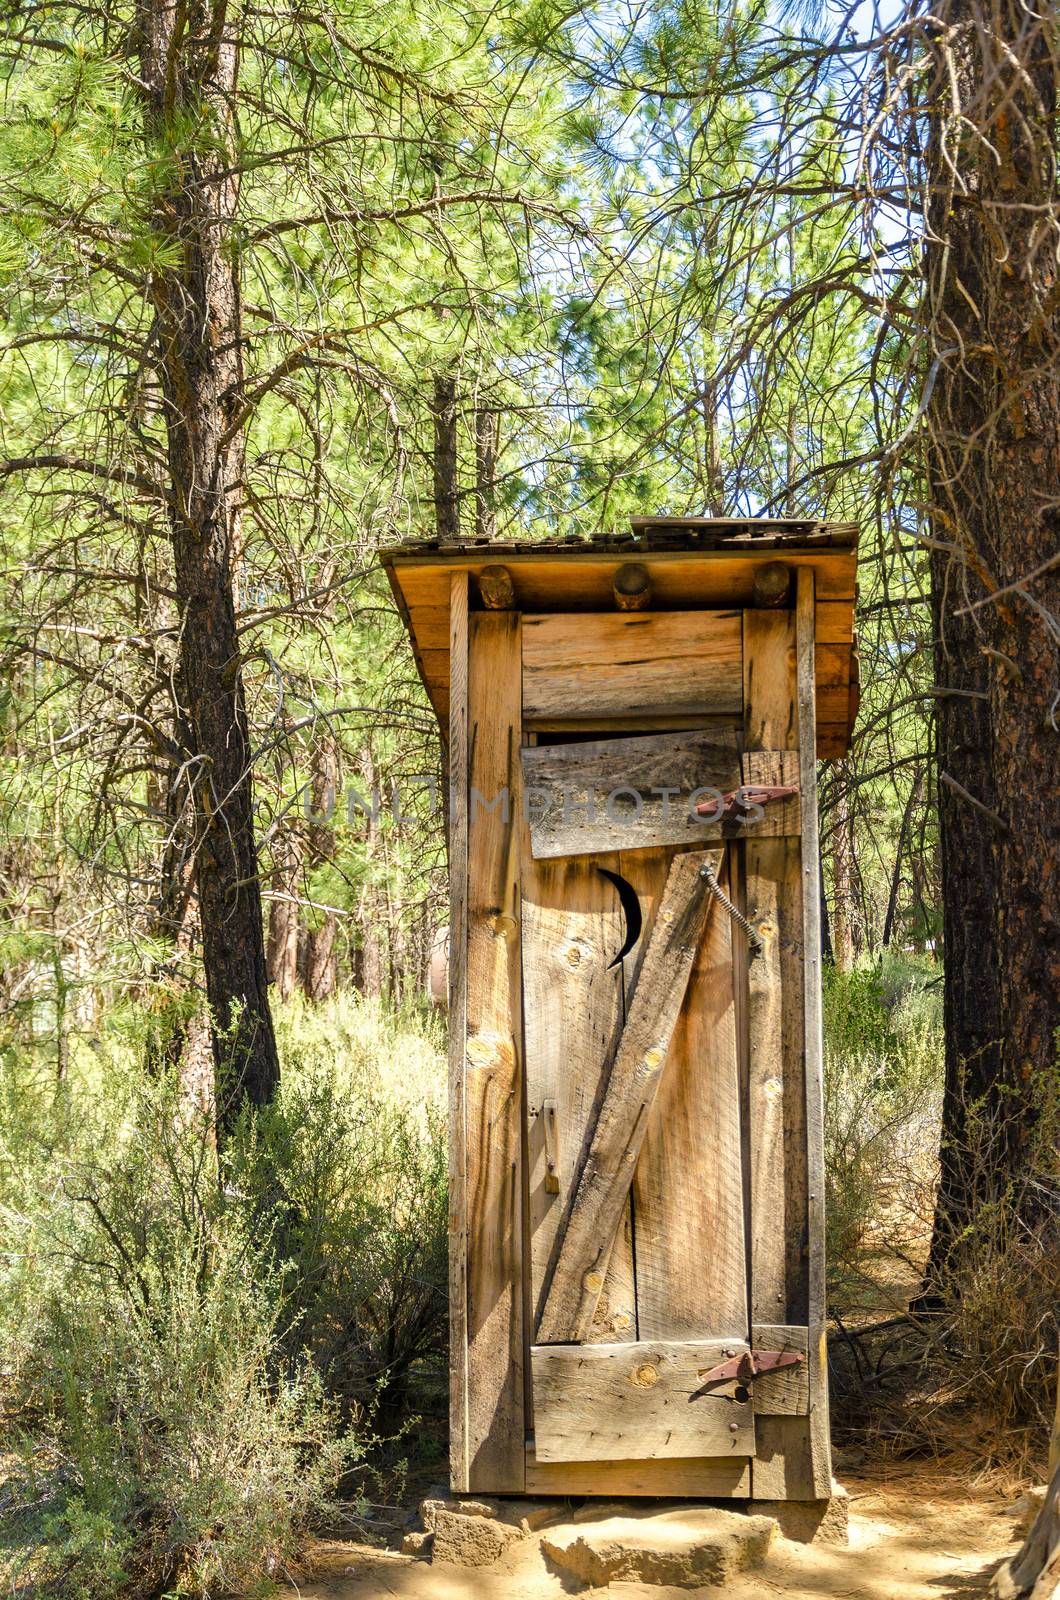 Old wooden historic outhouse in Bend, Oregon